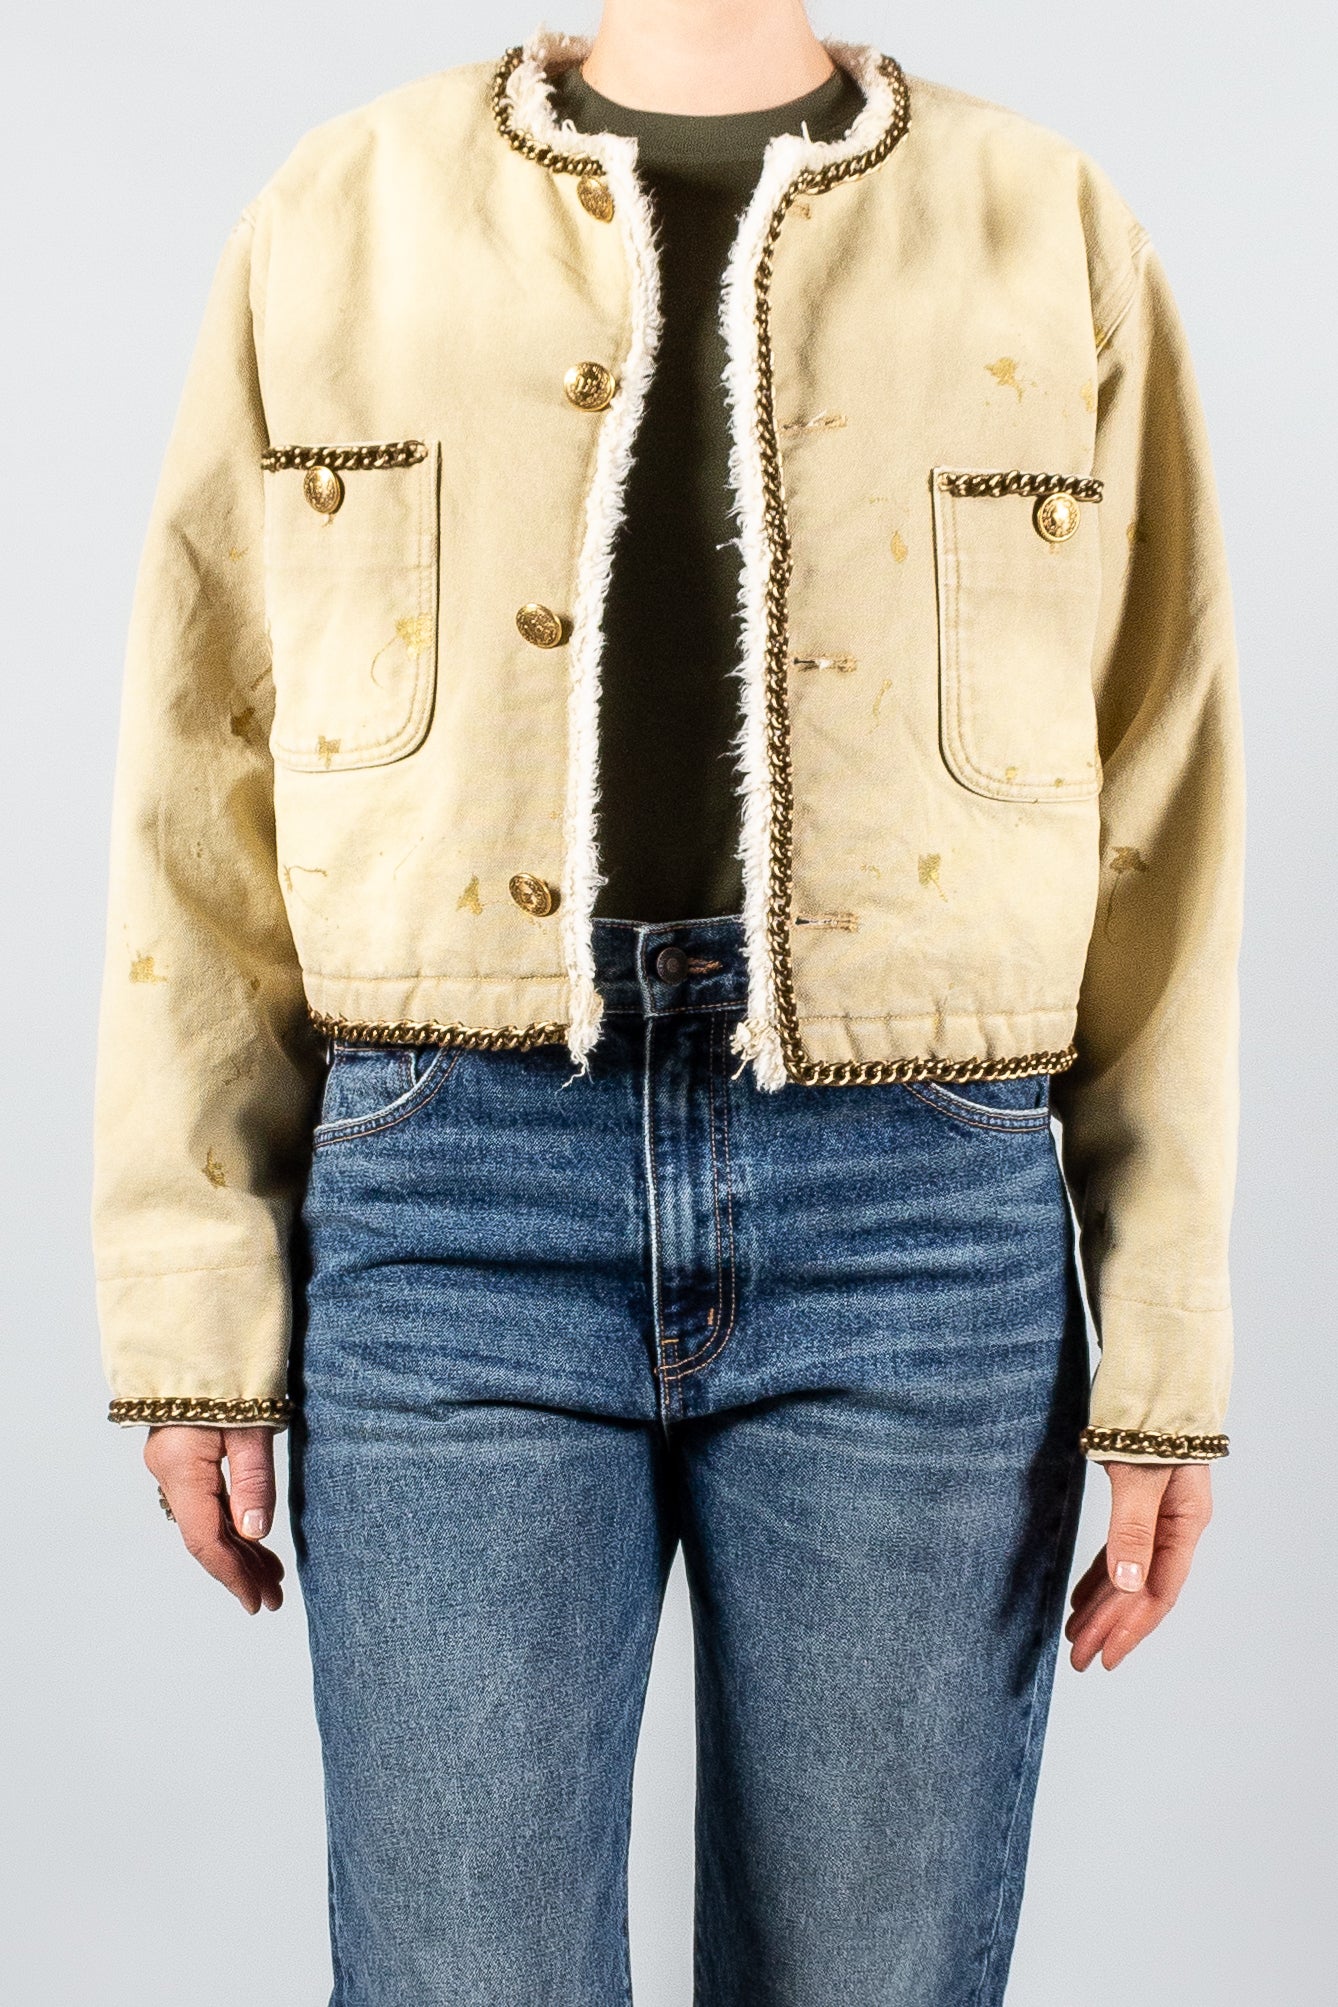 R13 Denim Cropped Chore Jacket-Jackets and Blazers-Misch-Boutique-Vancouver-Canada-misch.ca